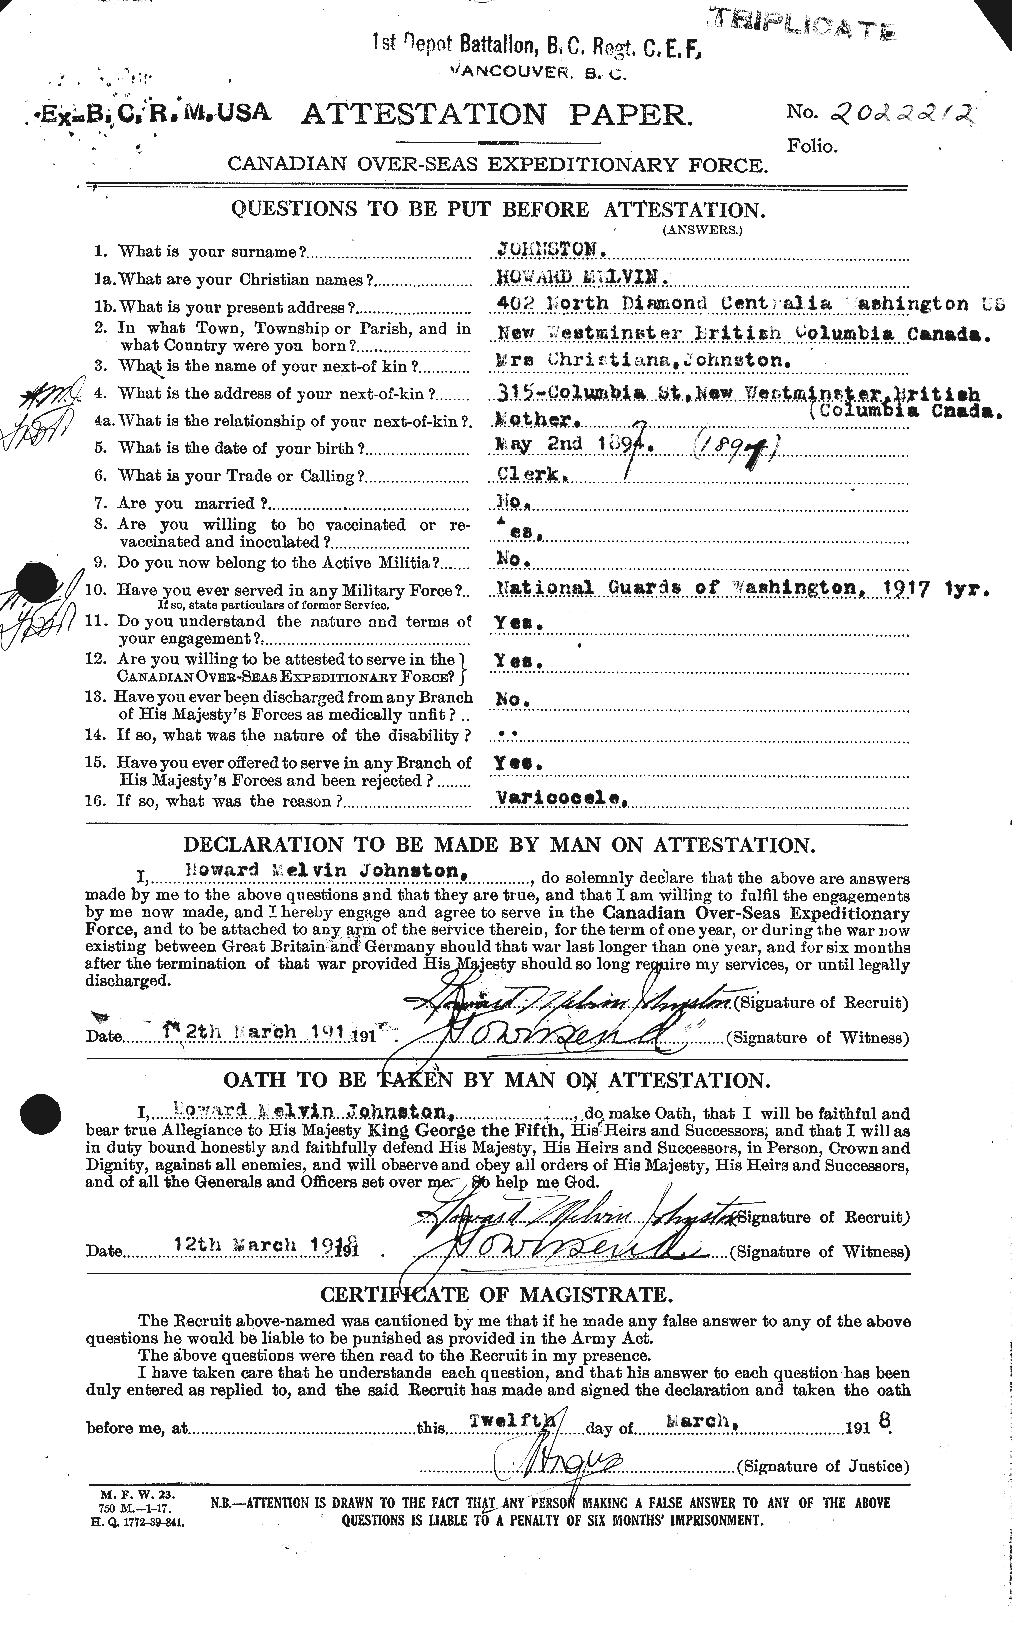 Personnel Records of the First World War - CEF 422655a